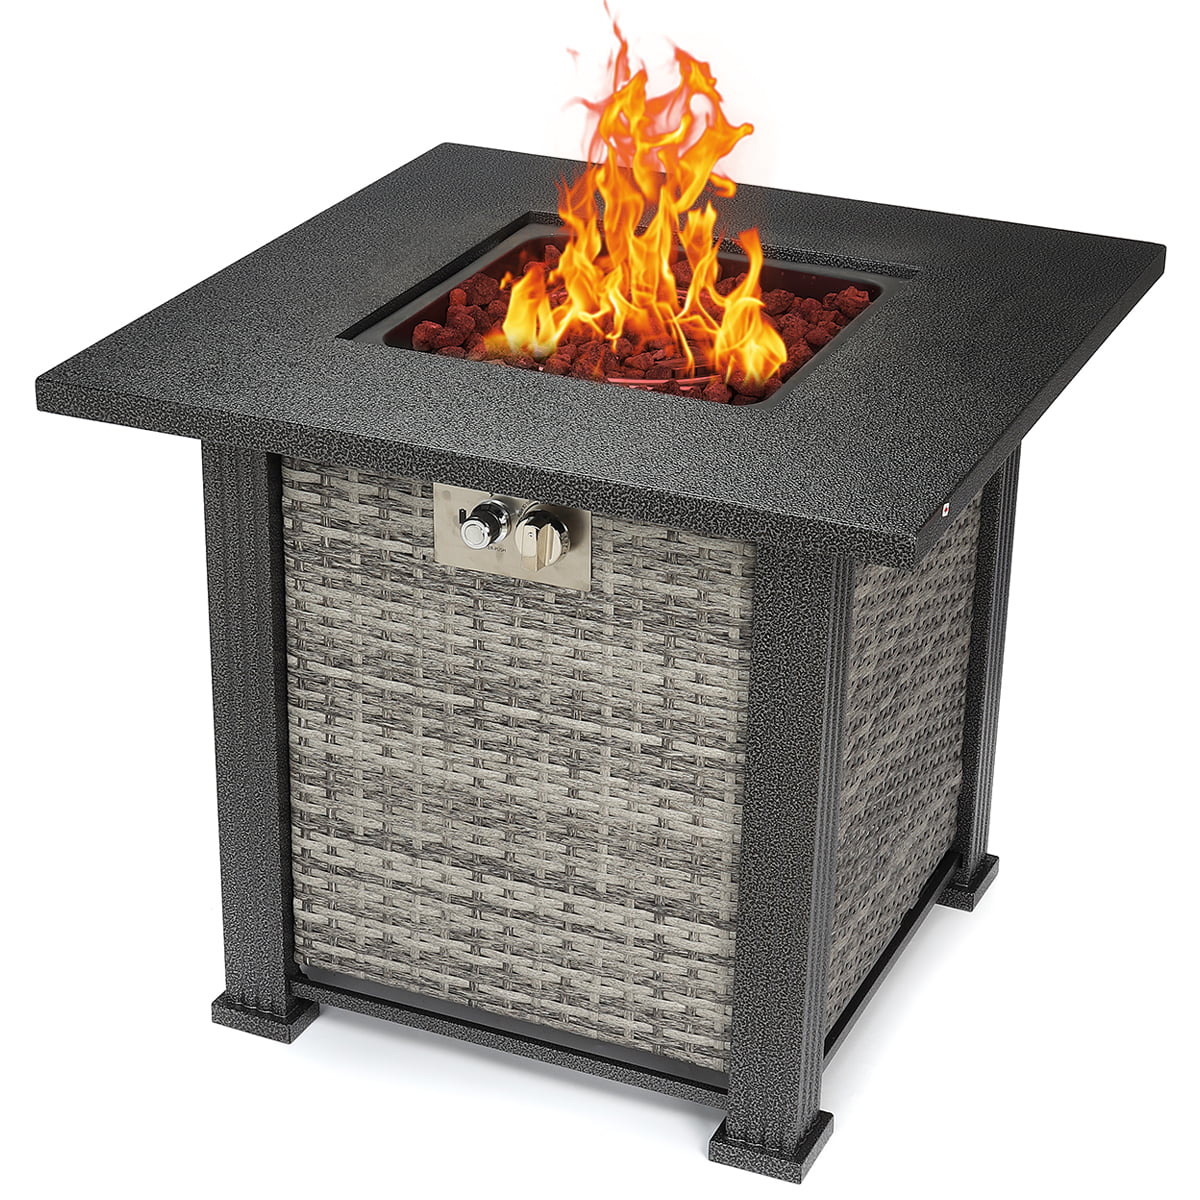 FOOWIN 28 Propane Fire Pit,2 in 1 Fire Pit Table with lid,Fire Pit Fireplace Dinning Table Lava Stone 50,000 BTU Auto-Ignition Gas and Strong Striped Steel Surface,Gift Gloves 